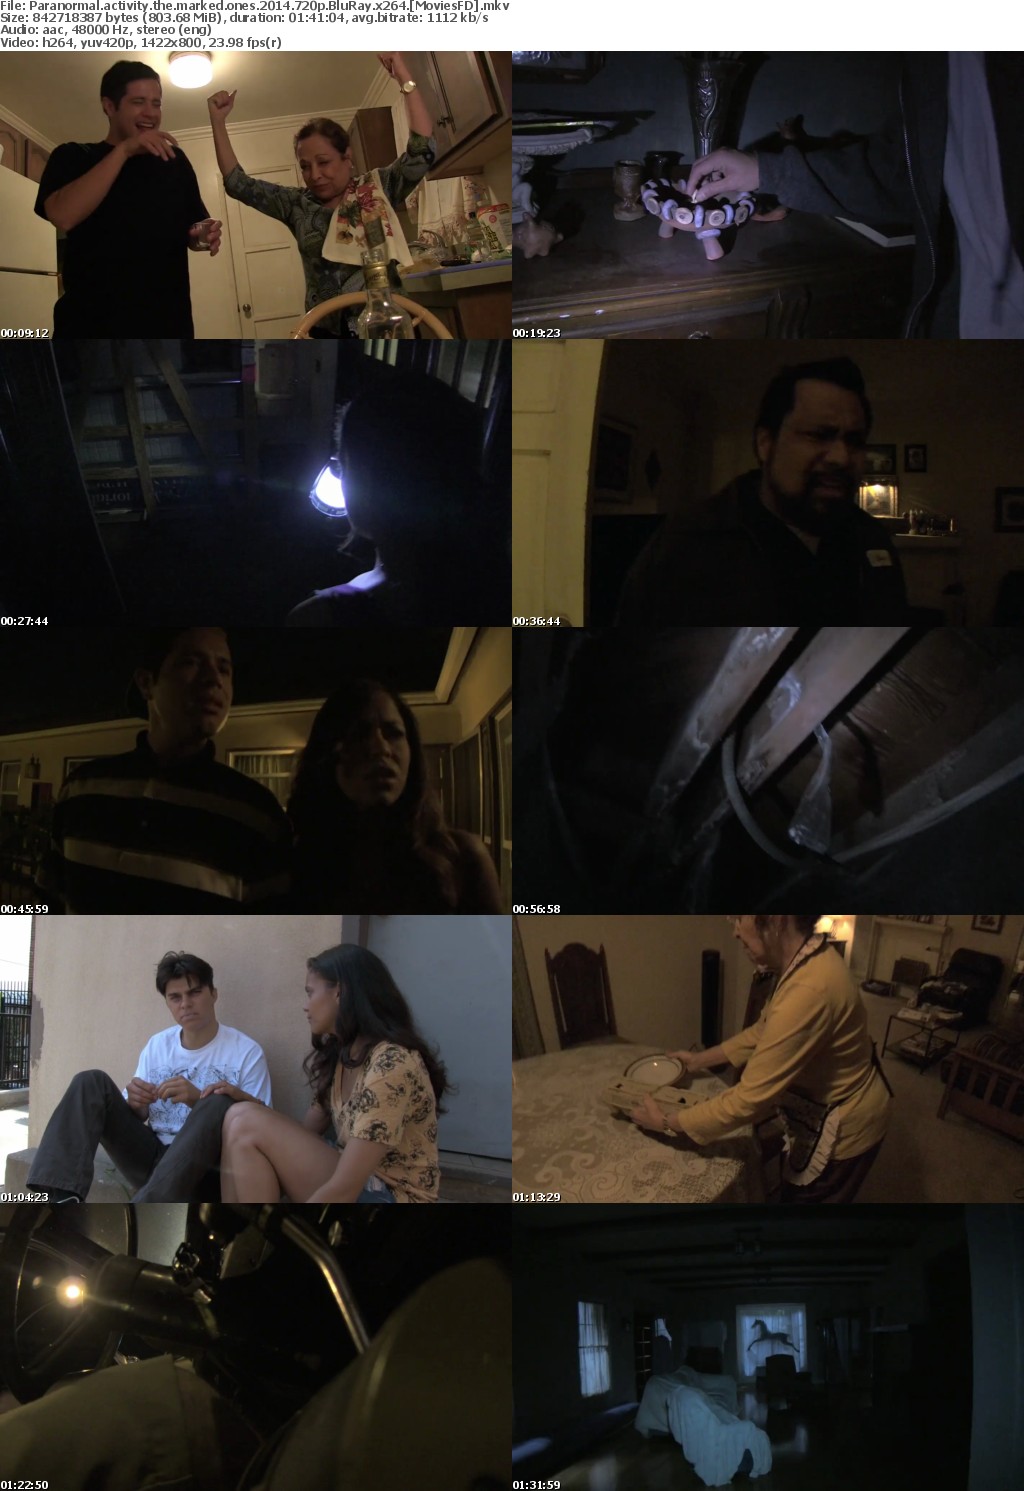 Paranormal Activity the Marked Ones (2014) 720p BluRay x264 - MoviesFD